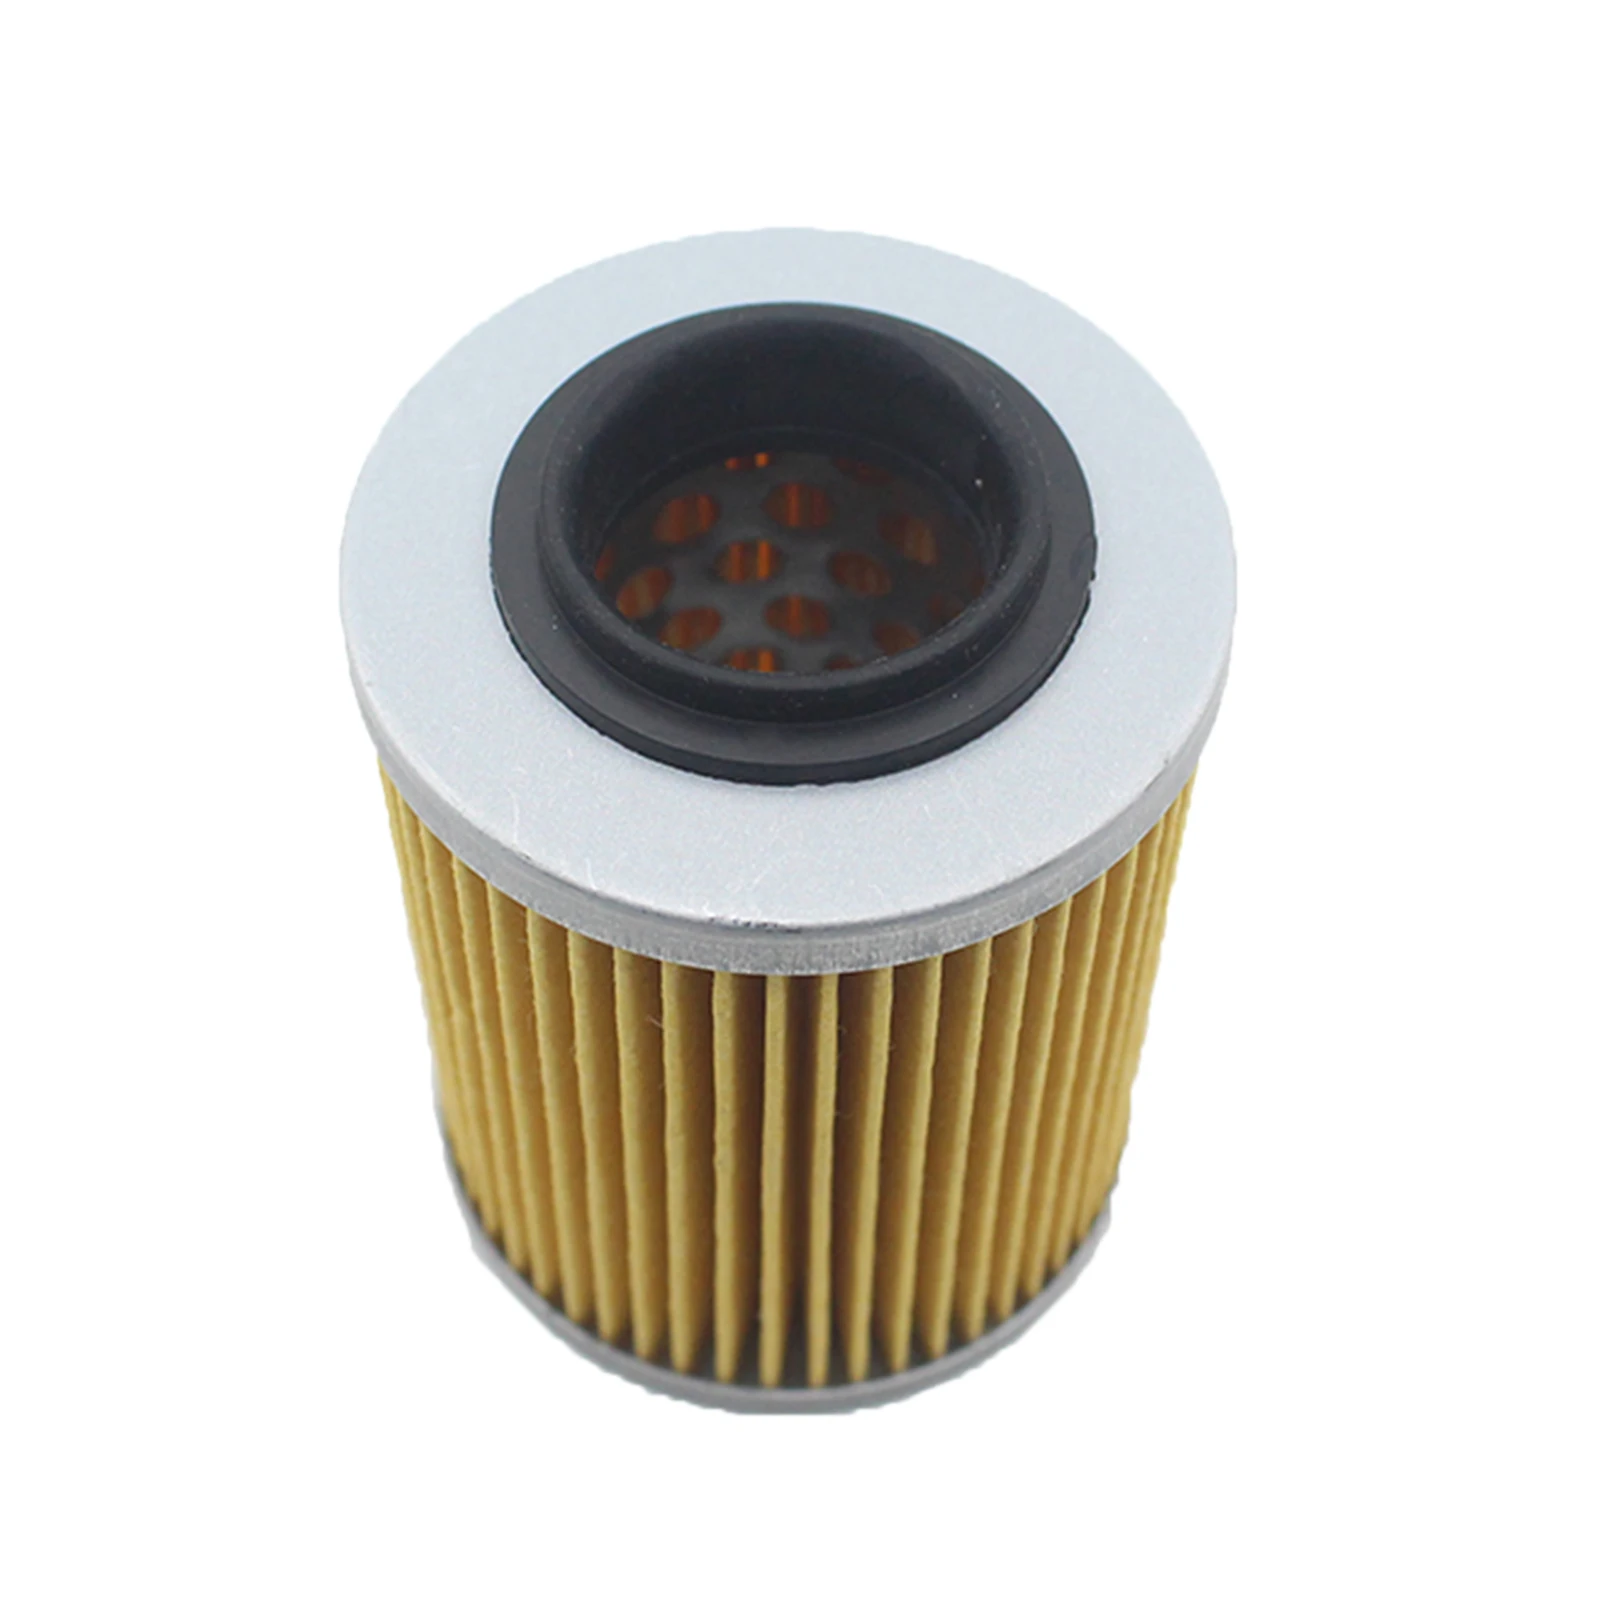 Motorcycle Oil Filter Fit for Odes LZ800 RM800 800 ATV Dominator Element Accessories Parts